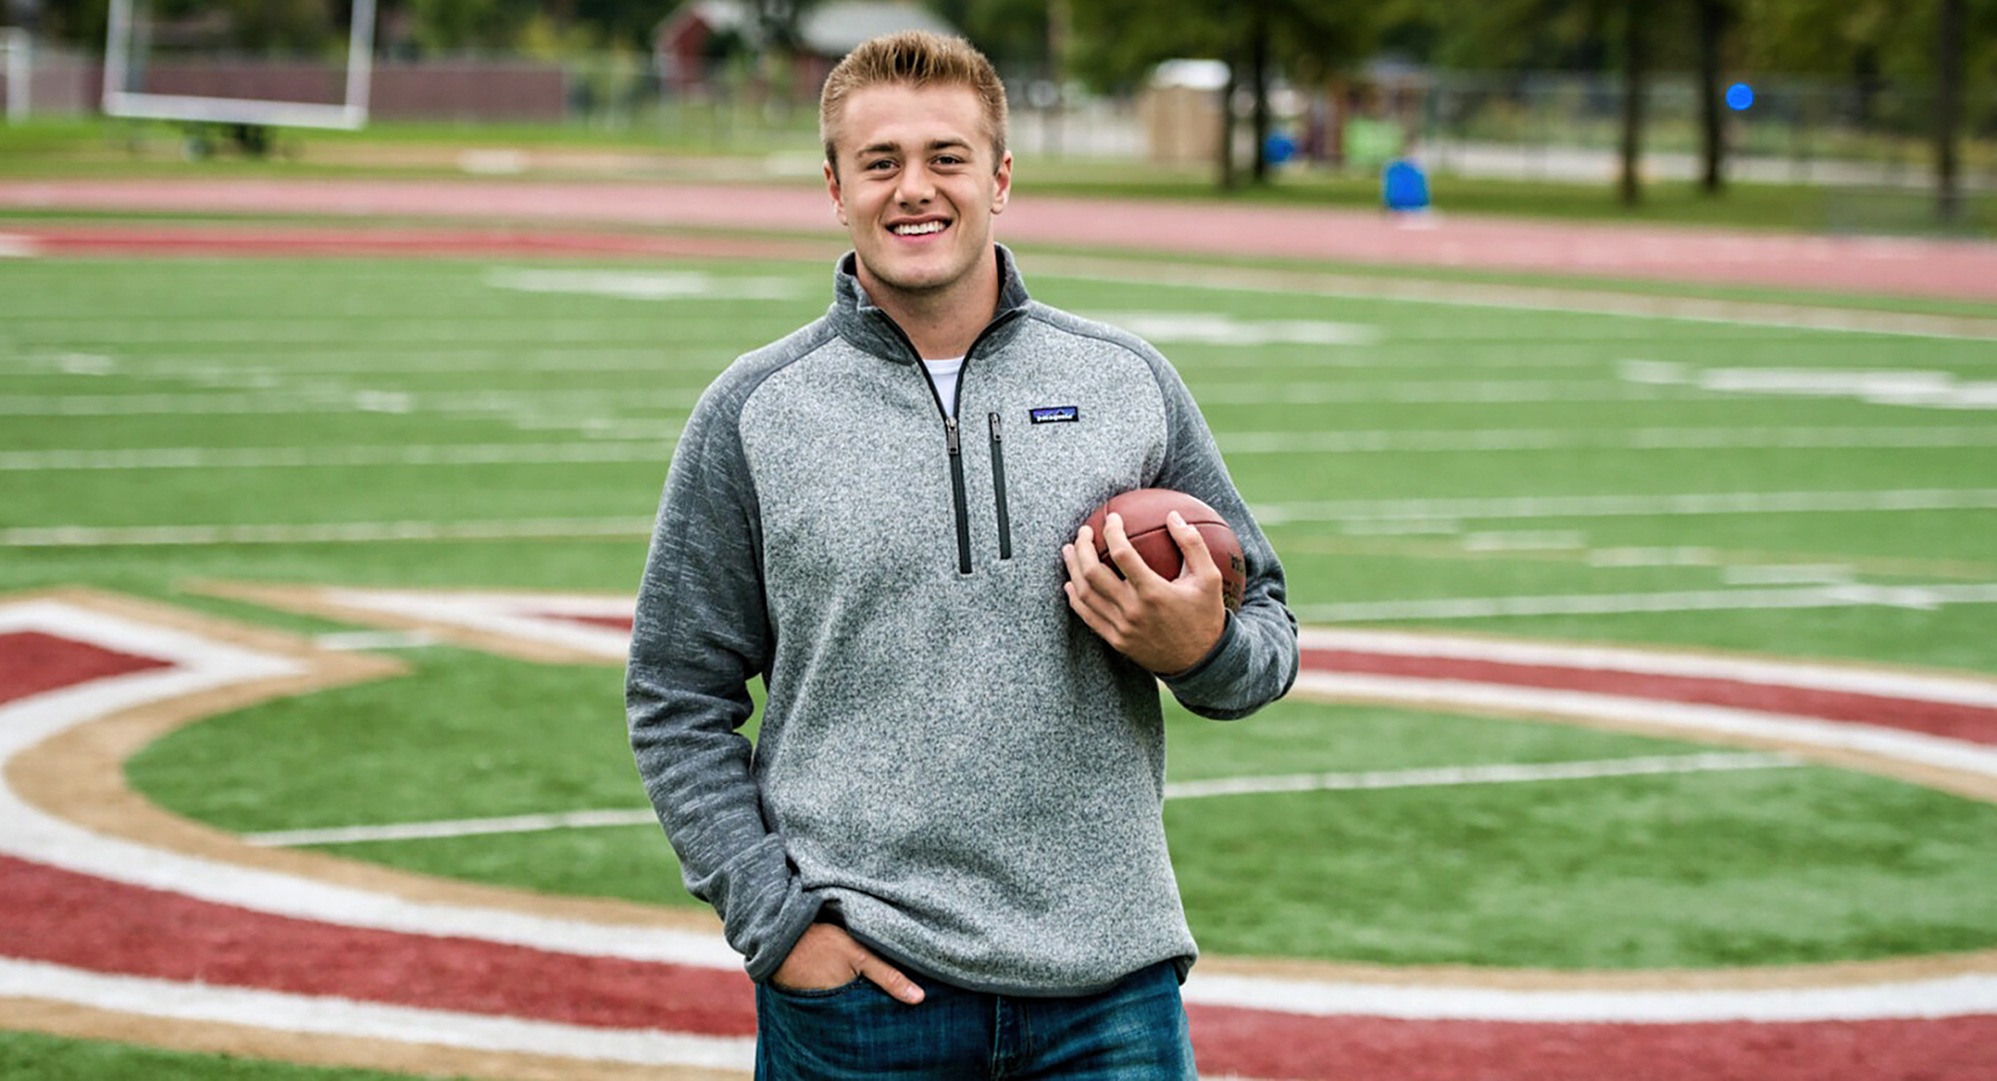 After a standout career as quarterback for the Cobber football team, Blake Kragnes is using his leadership skills as an healthcare administrator during a pandemic.